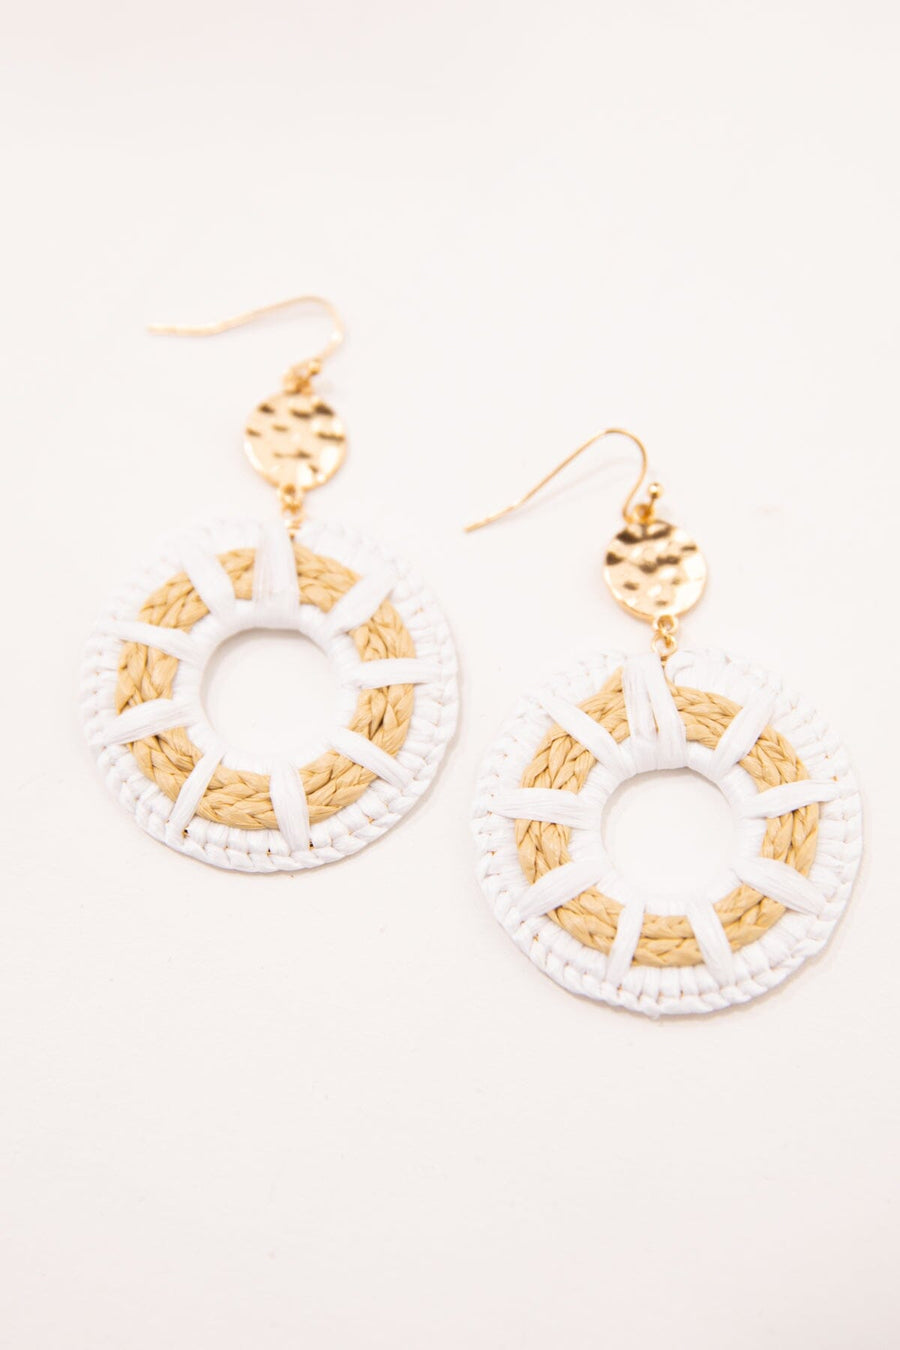 White and Tan Braided Raffia Round Earrings - Filly Flair